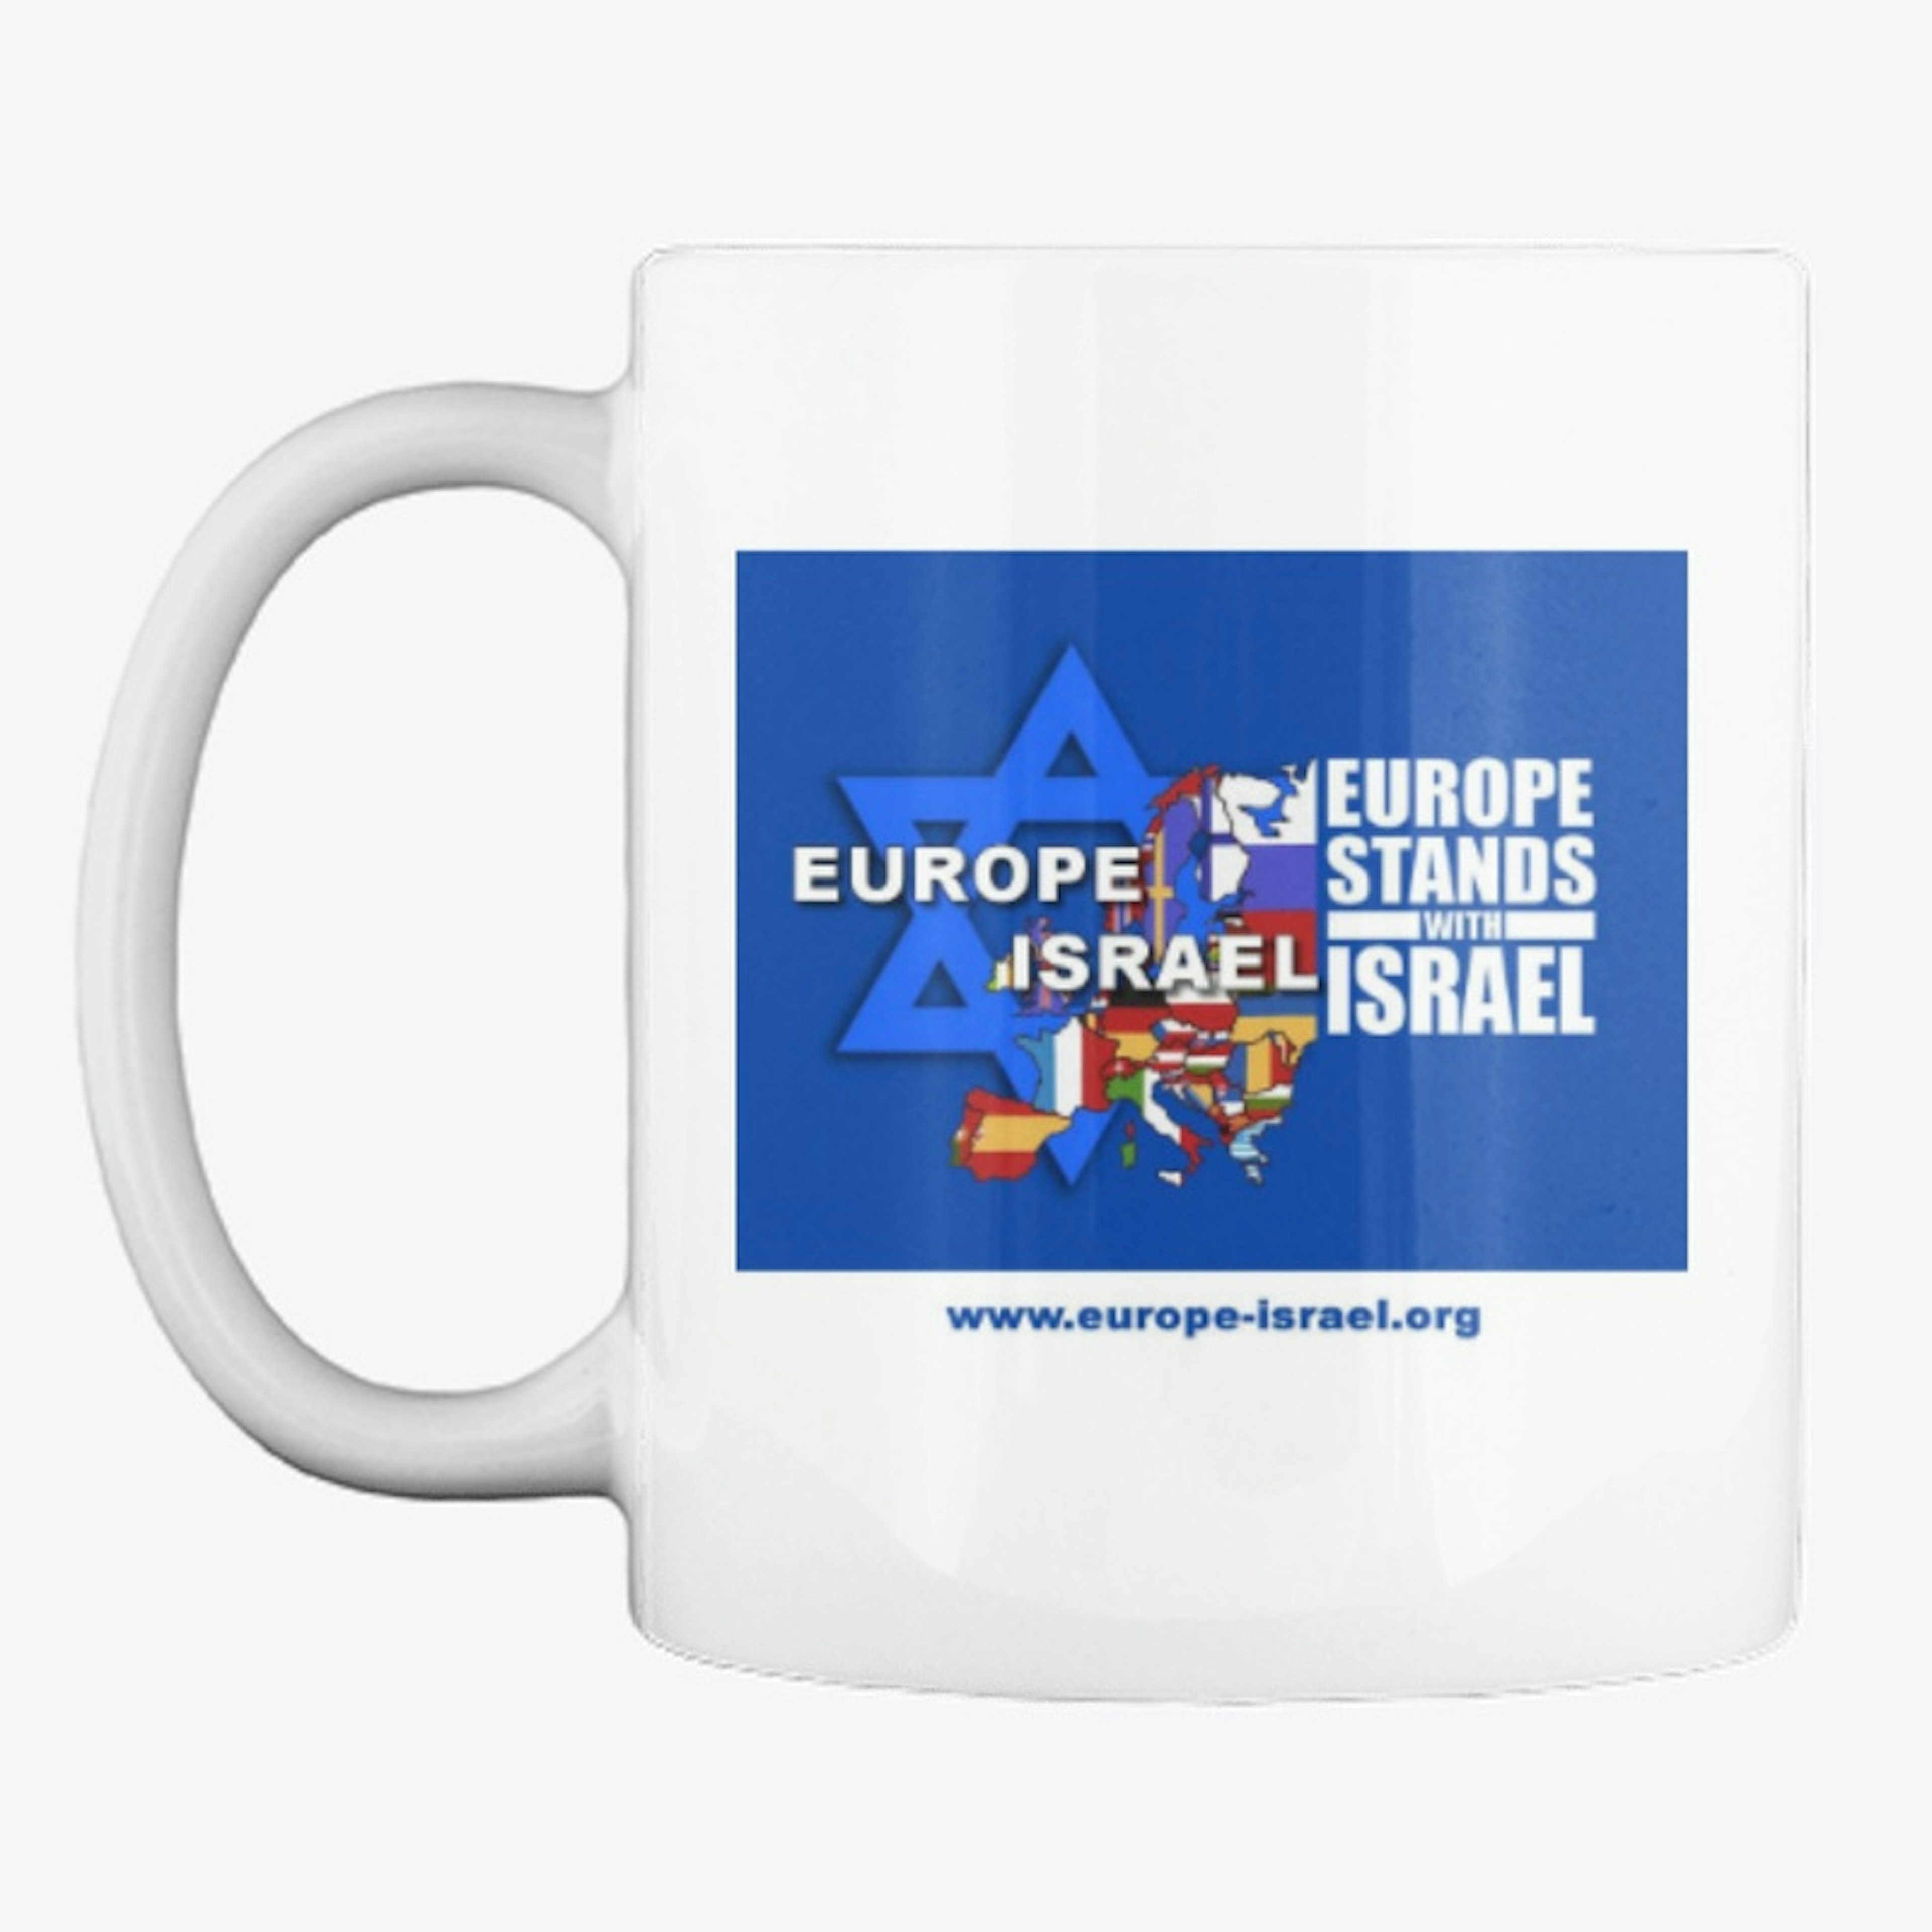 Europe stands with Israel blue